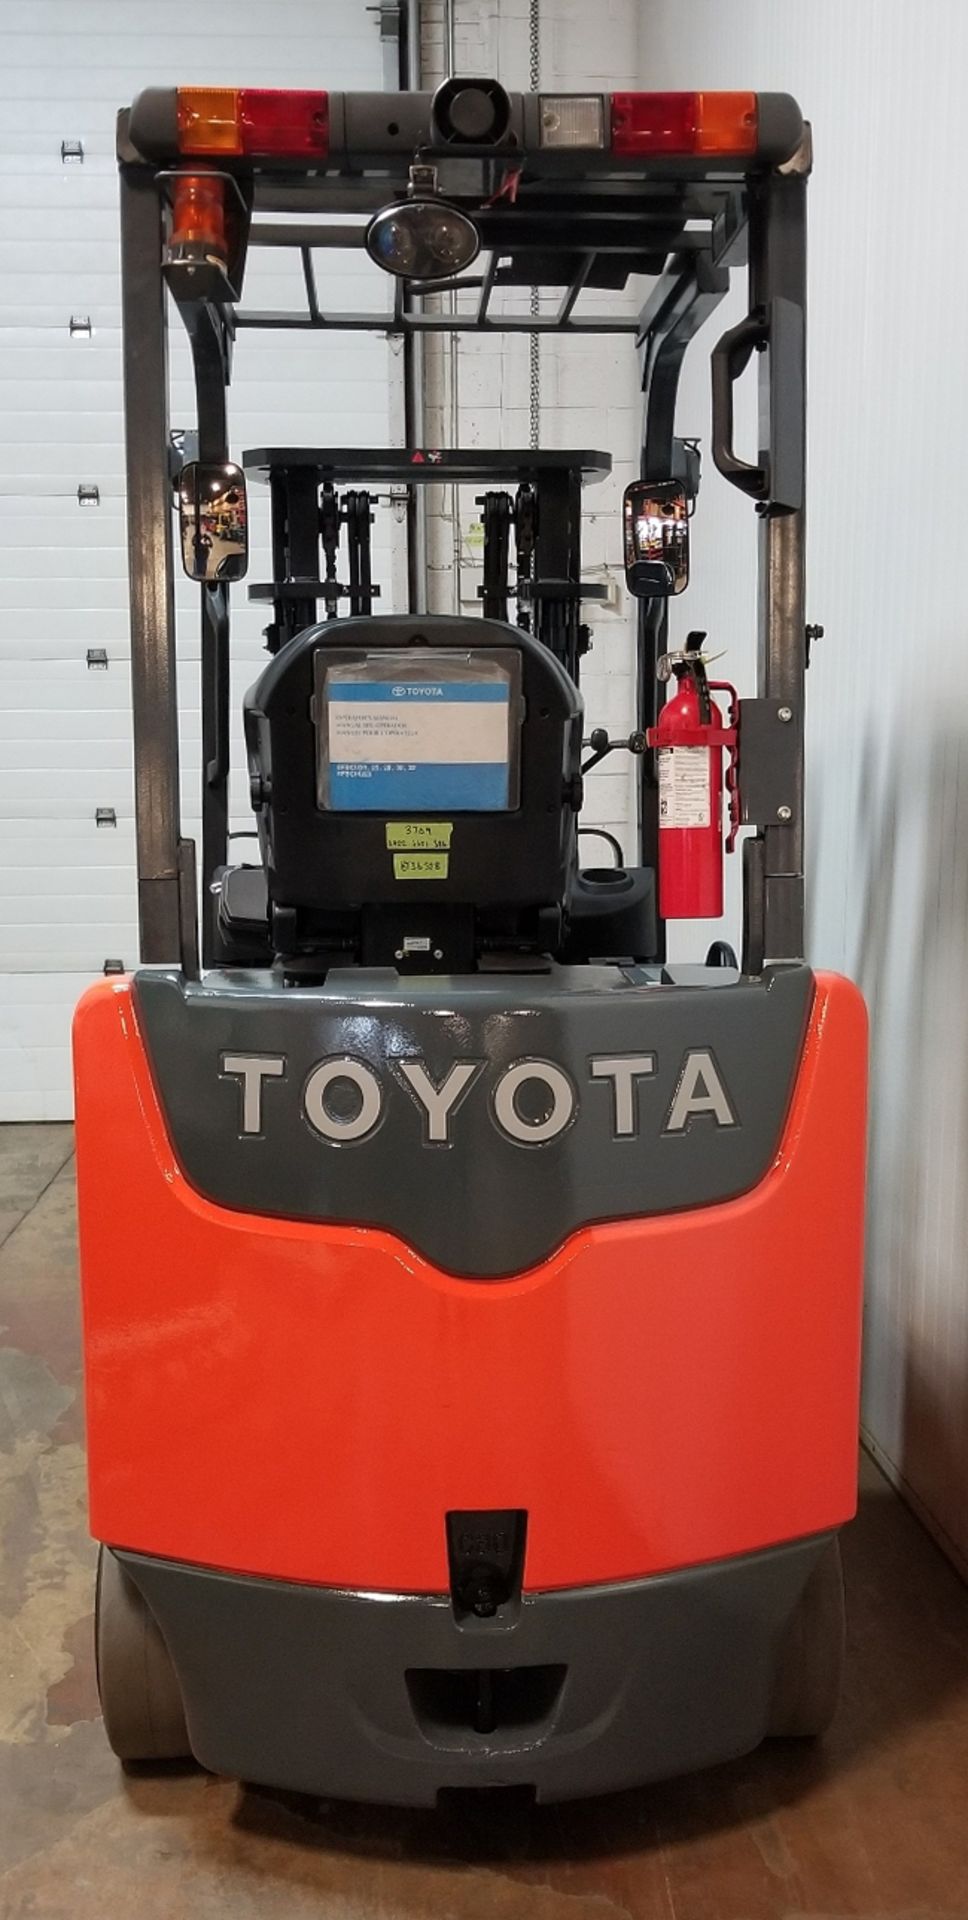 TOYOTA (2015) 8FBCU30 6,000 LB. 36V ELECTRIC FORKLIFT WITH 131" MAX. LIFT HEIGHT, SIDE SHIFT, - Image 3 of 3